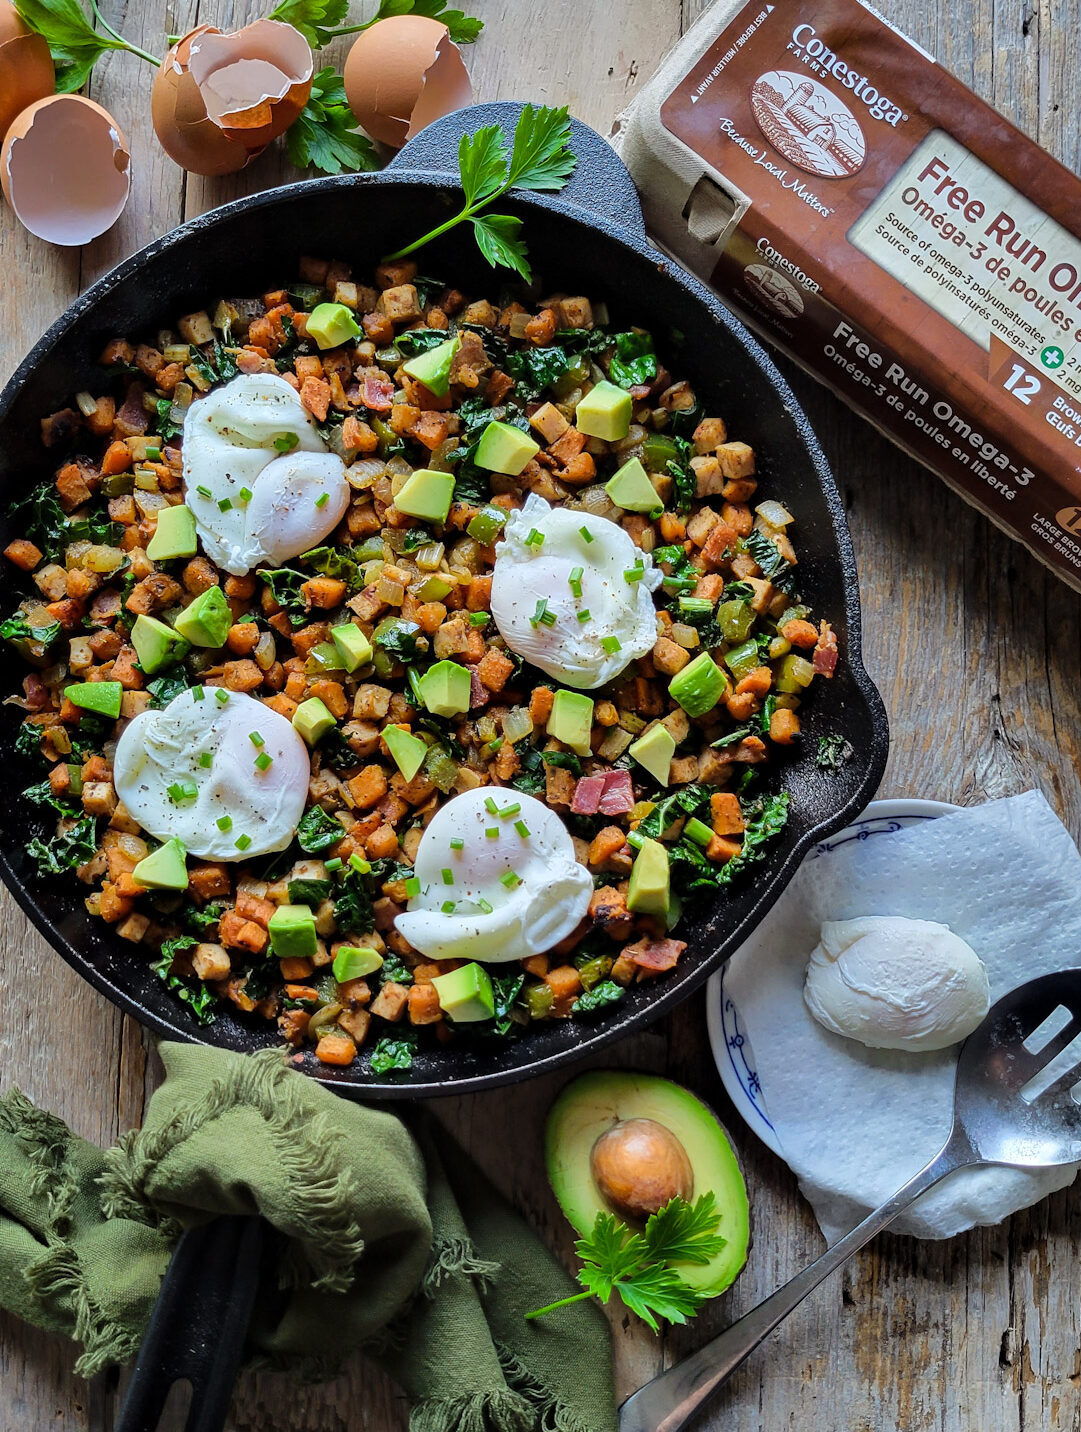 A skillet filled with Turkey Sweet Potato Hash and topped with poaches eggs. Another poached egg is on a plate, as well as avocado and and egg carton are to the side.